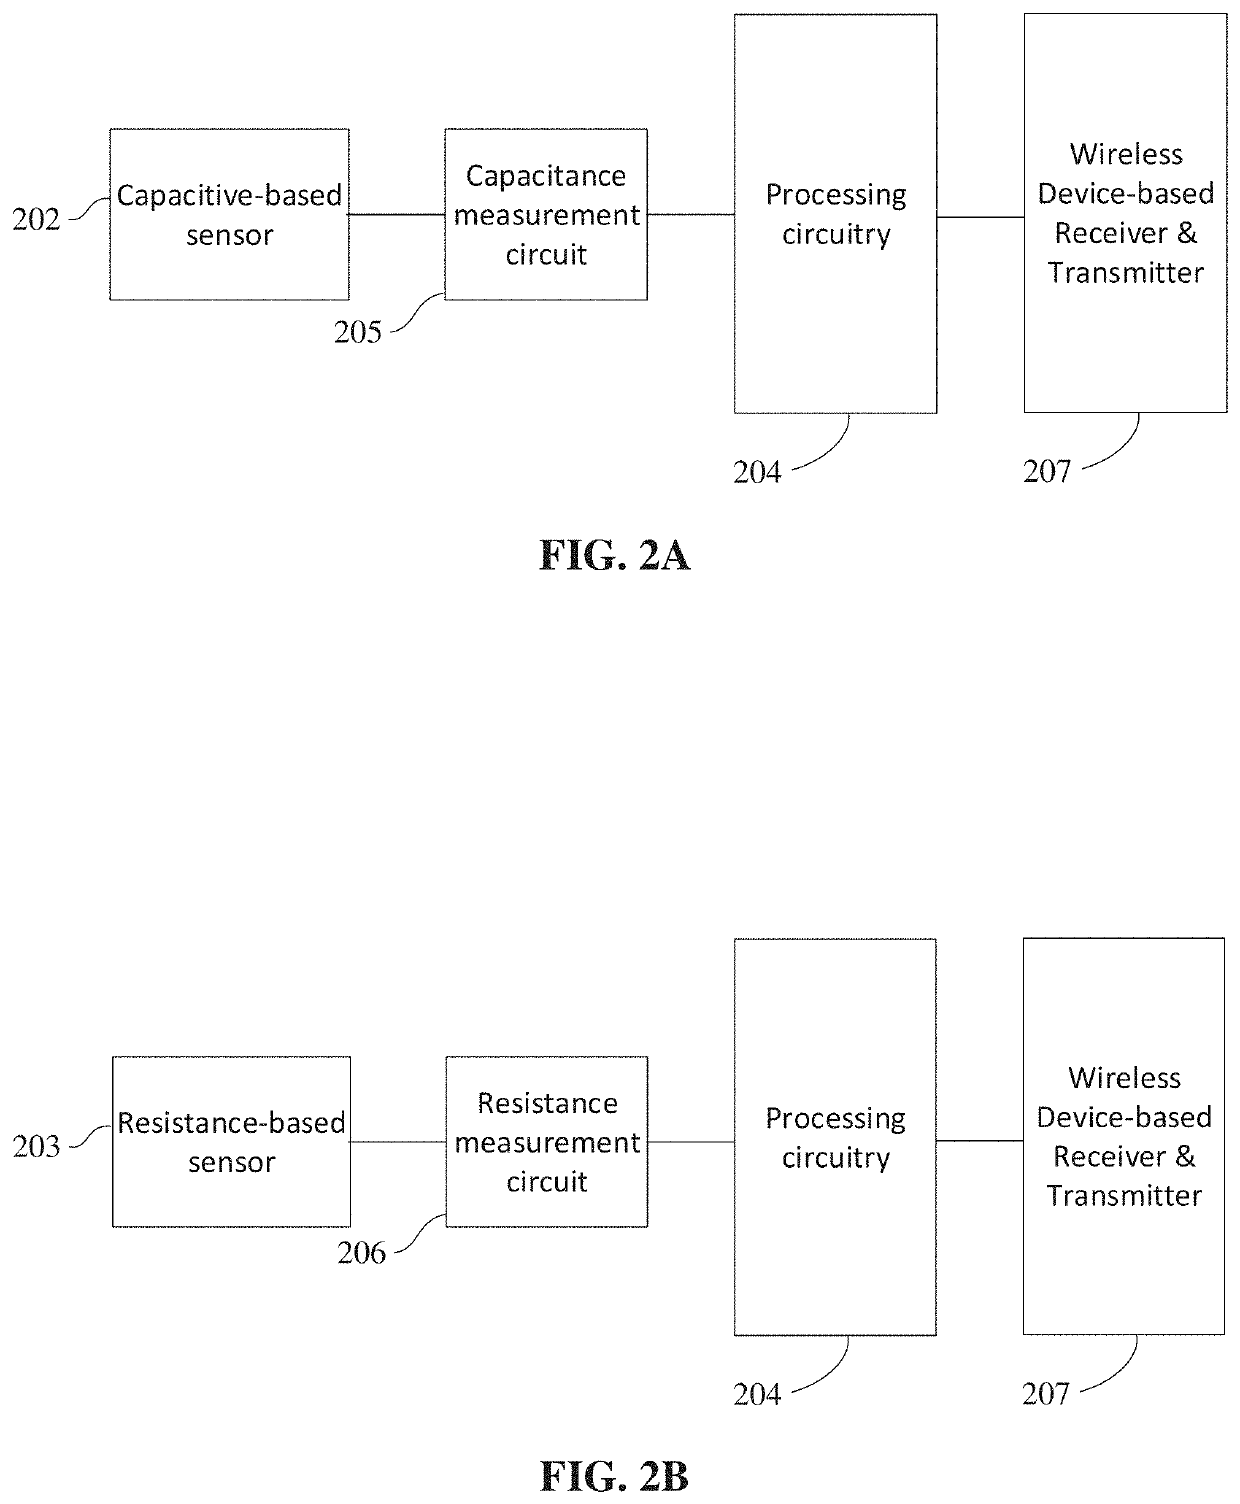 Material property monitoring and detection using wireless devices